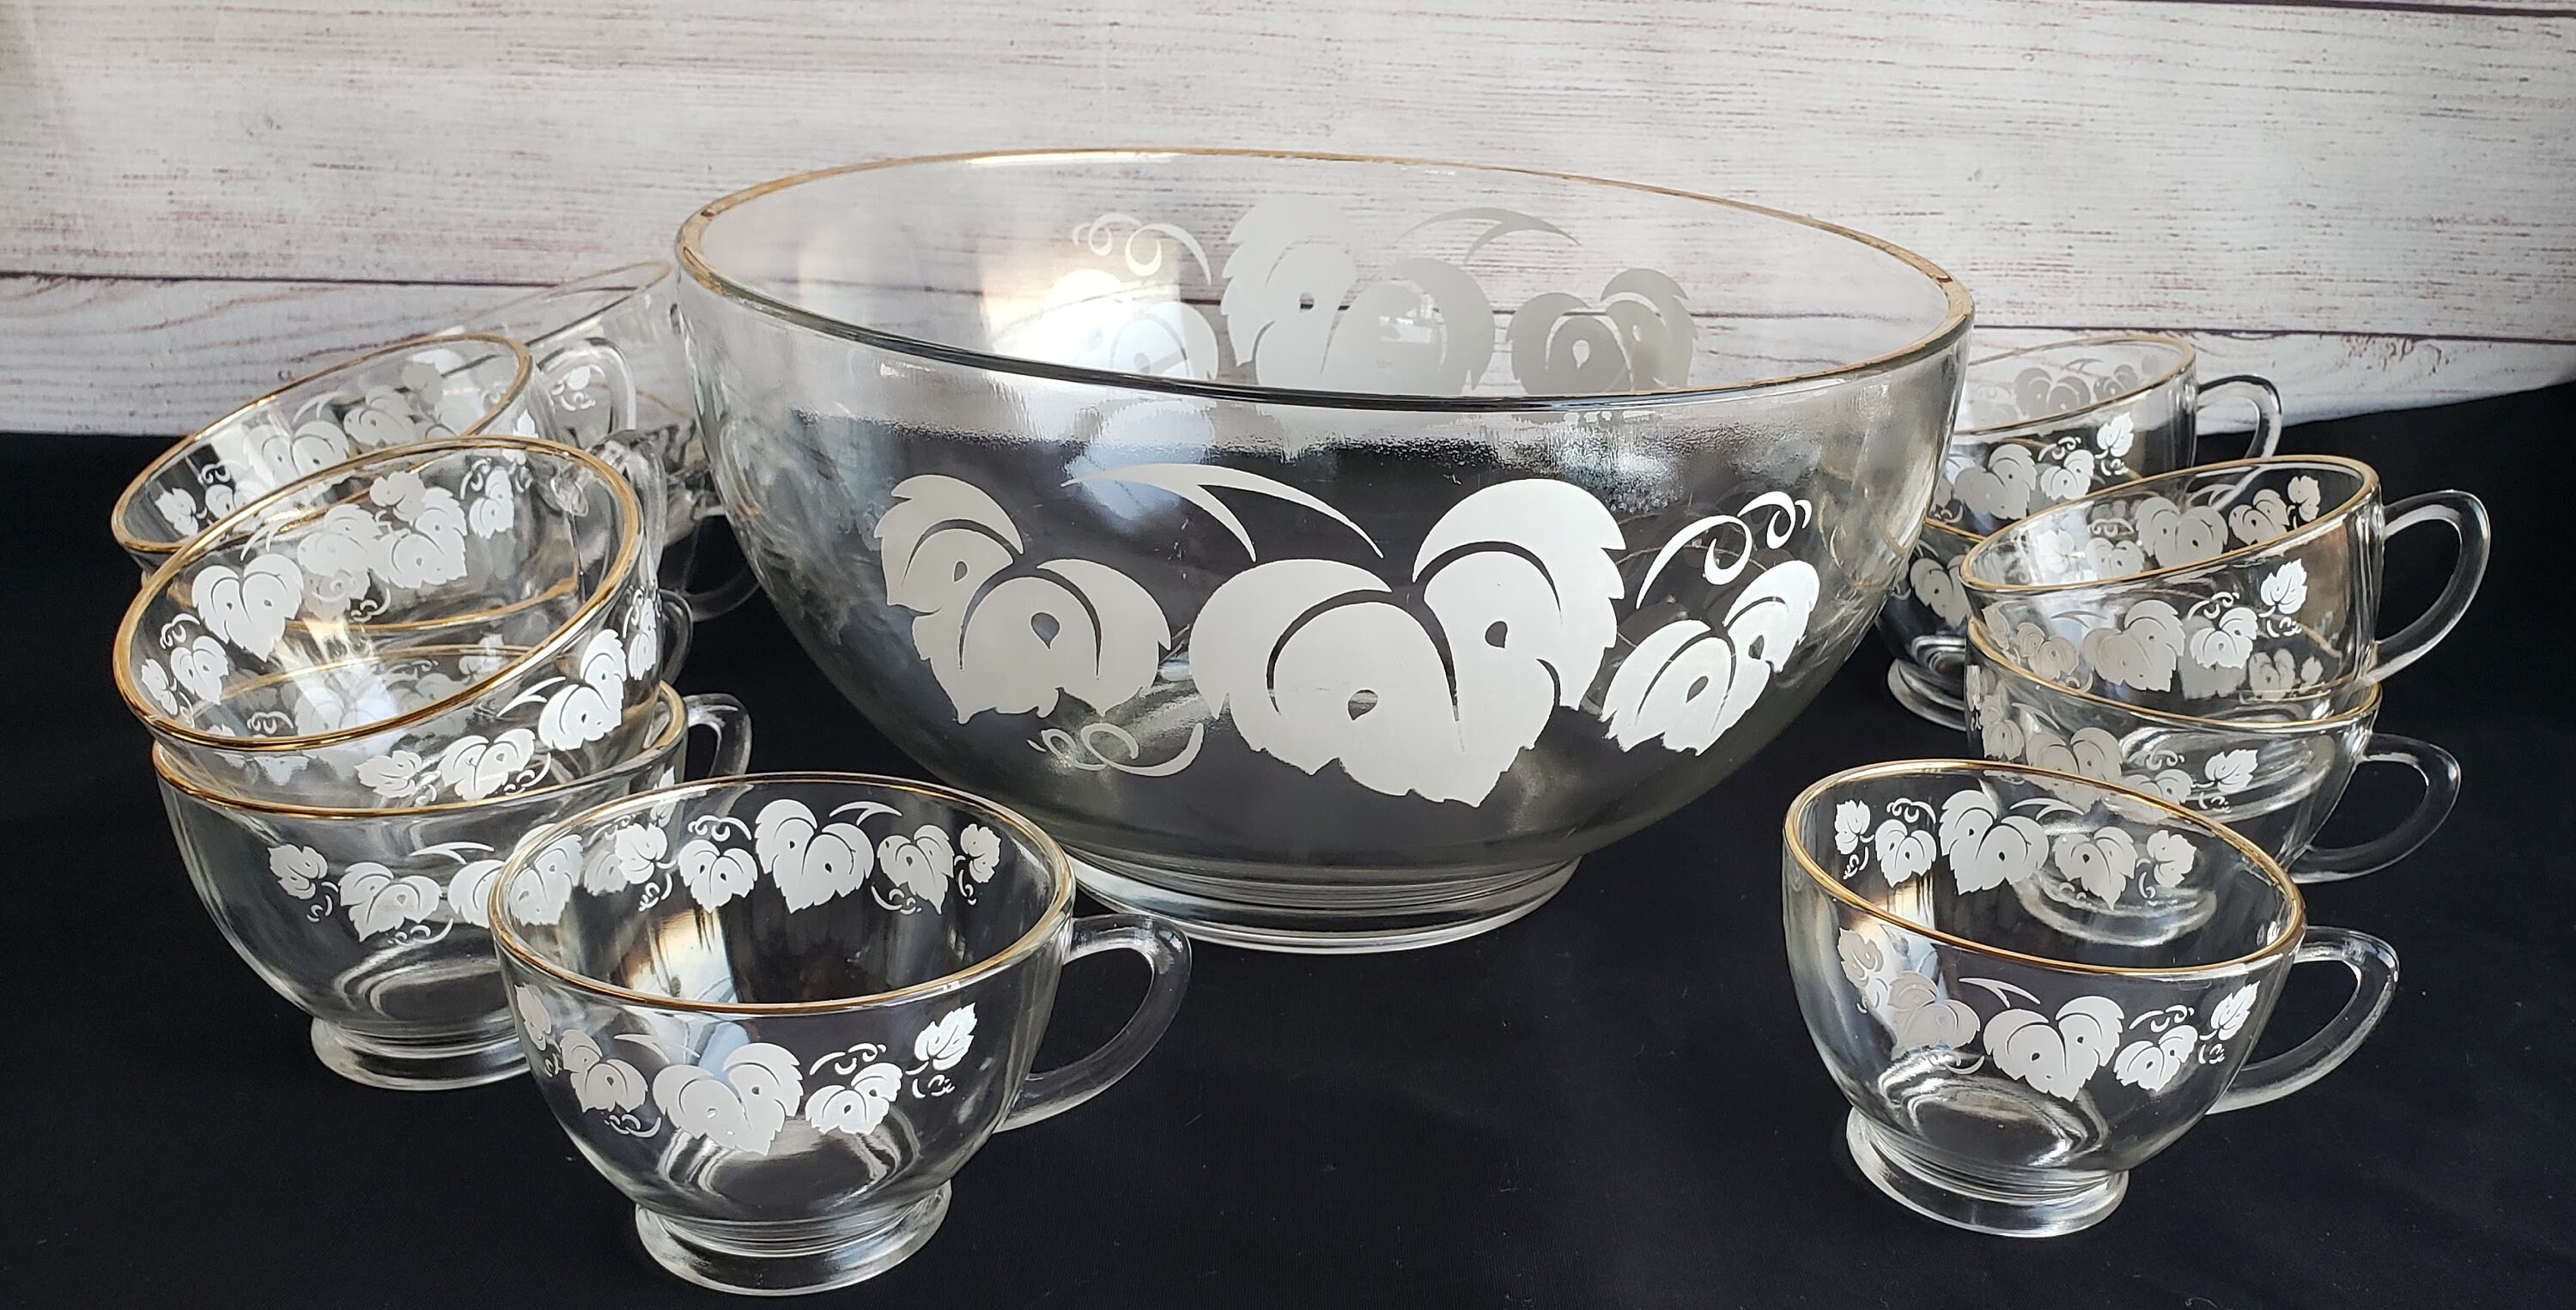 19th Century Austrian Cut Glass Punch Bowl with Lid